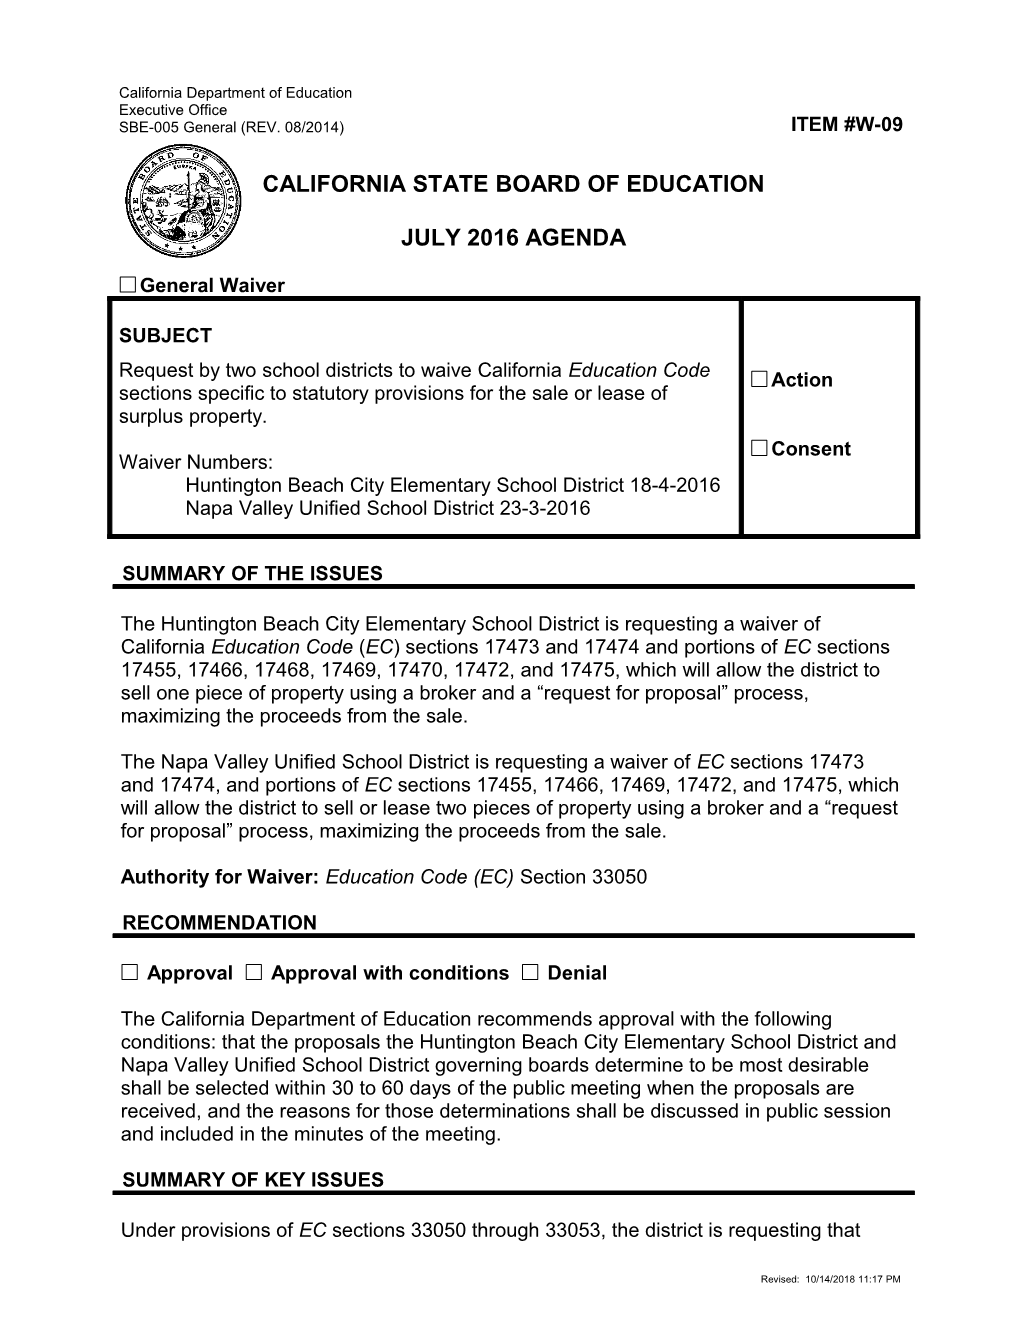 July 2016 Waiver Item W-09 - Meeting Agendas (CA State Board of Education)